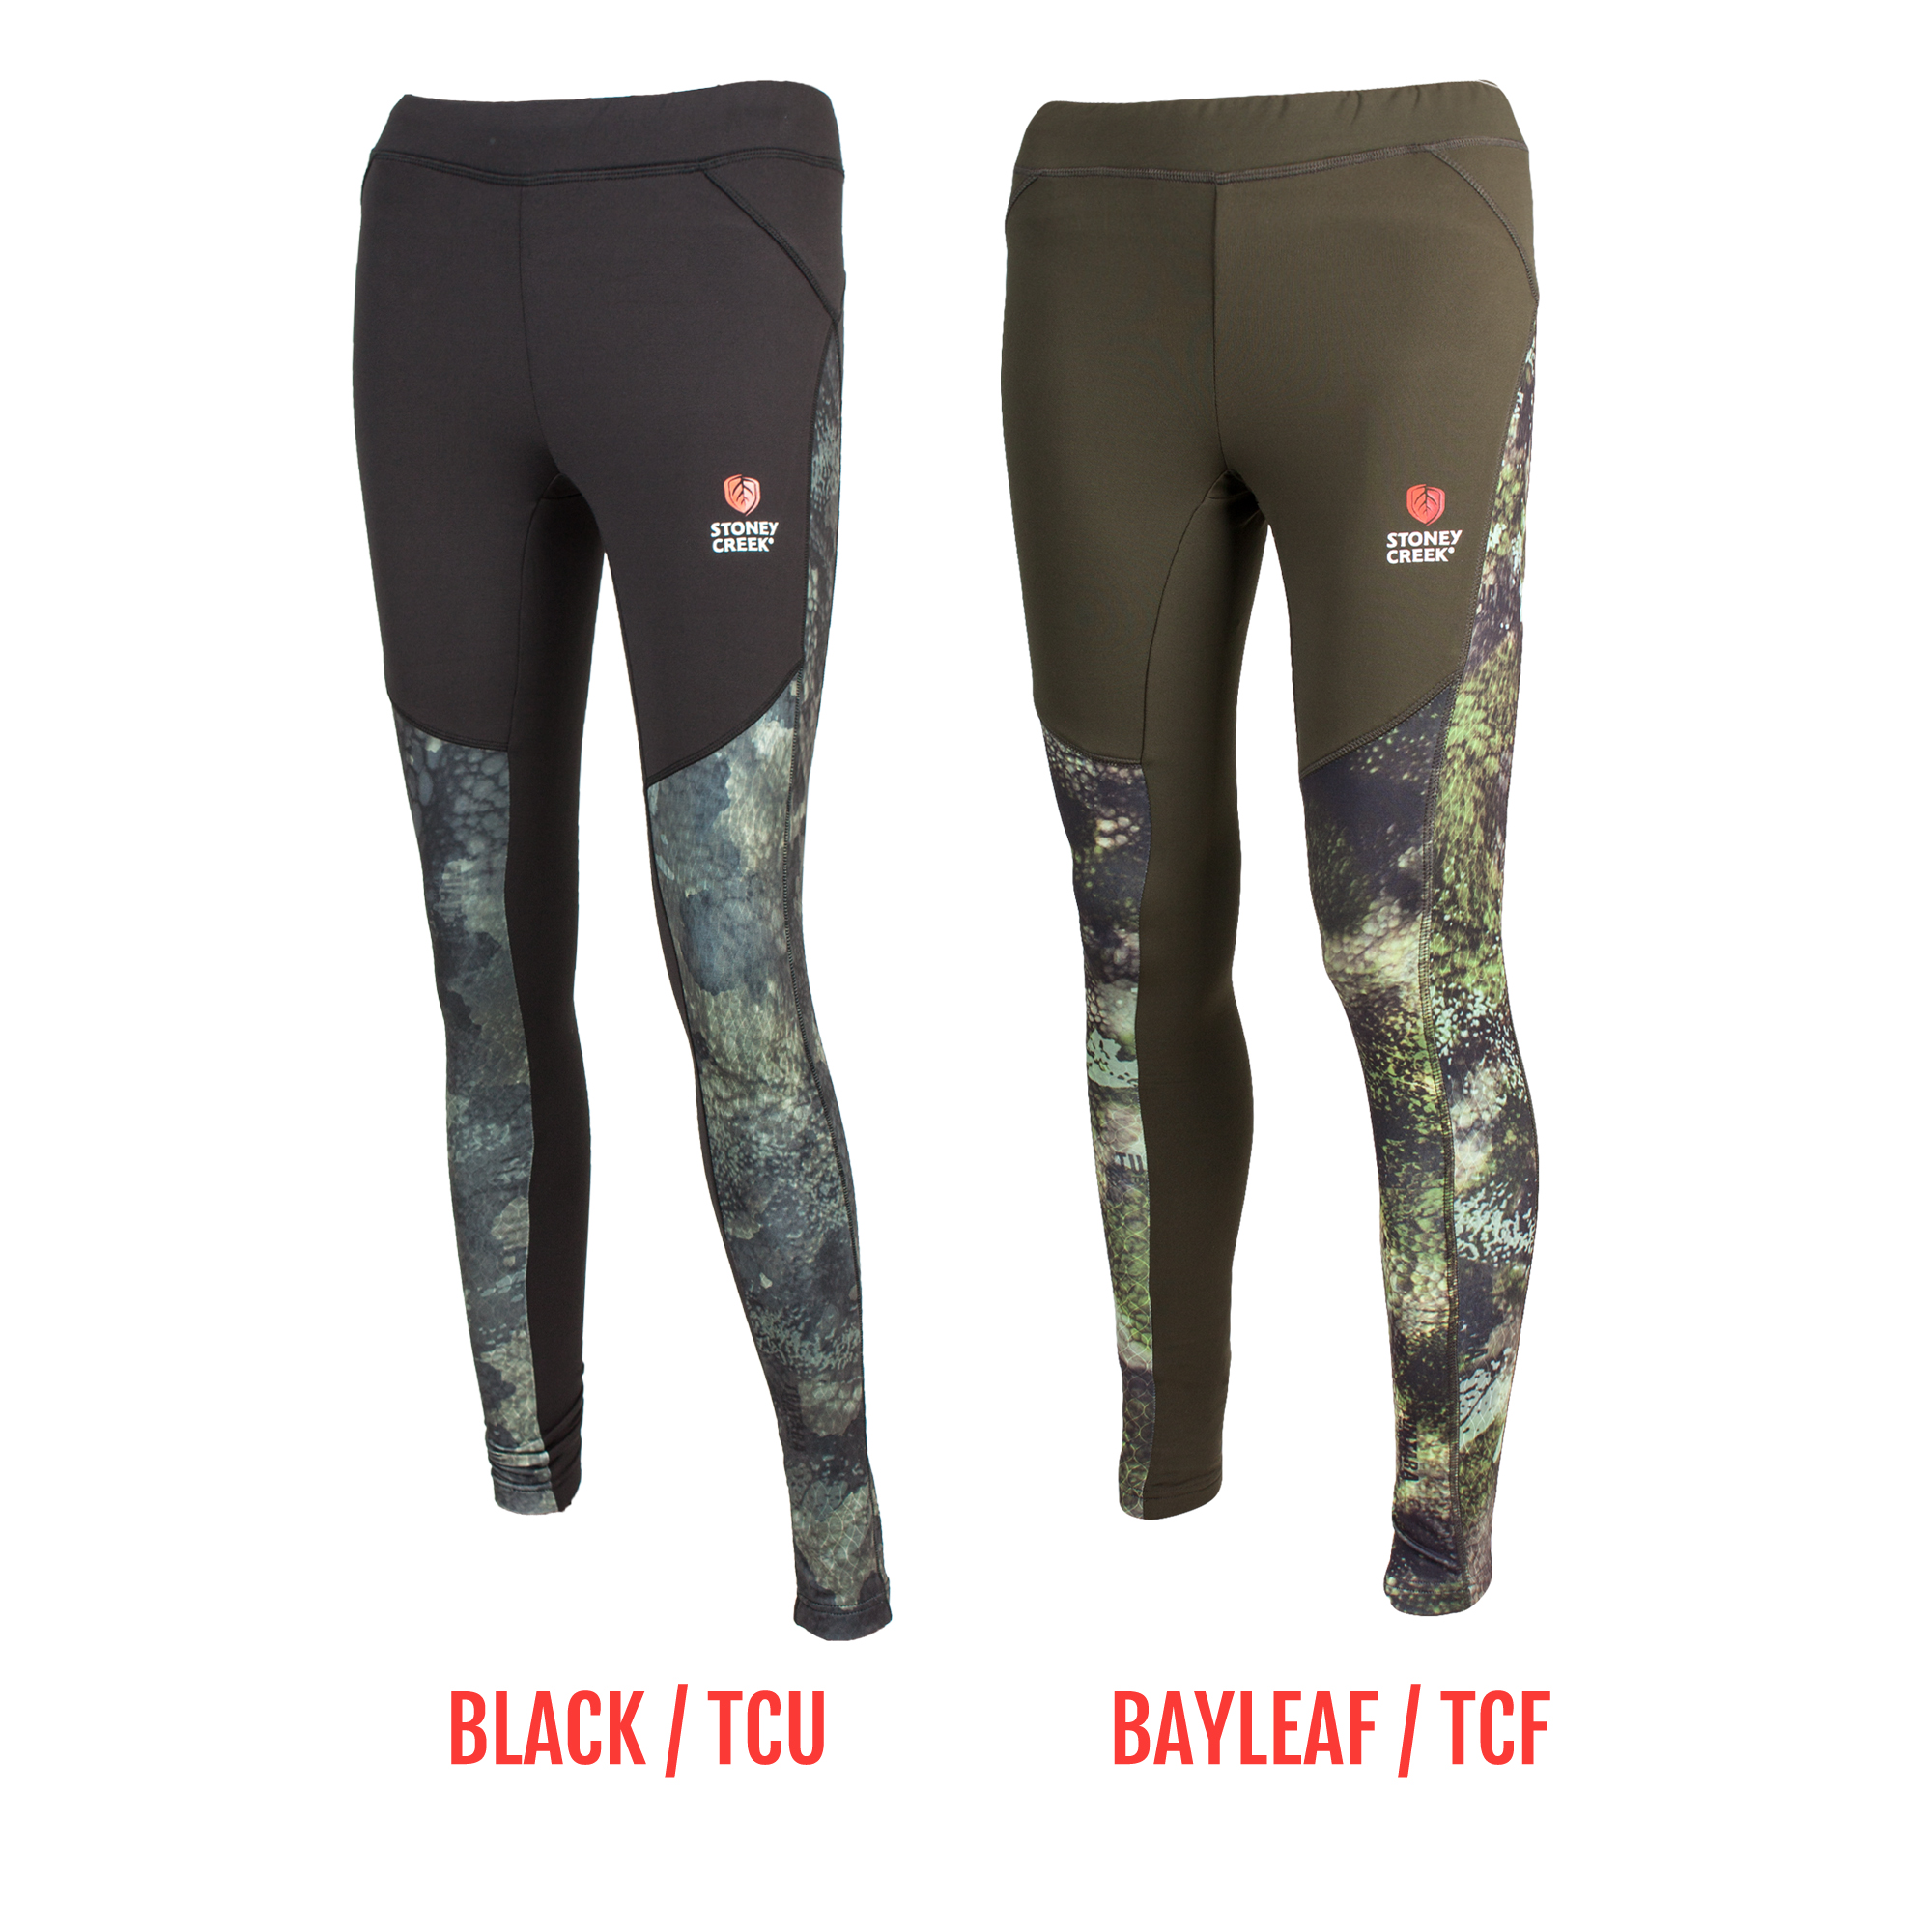 Women's SC Active Tights - Black/TCU and Bayleaf/TCF